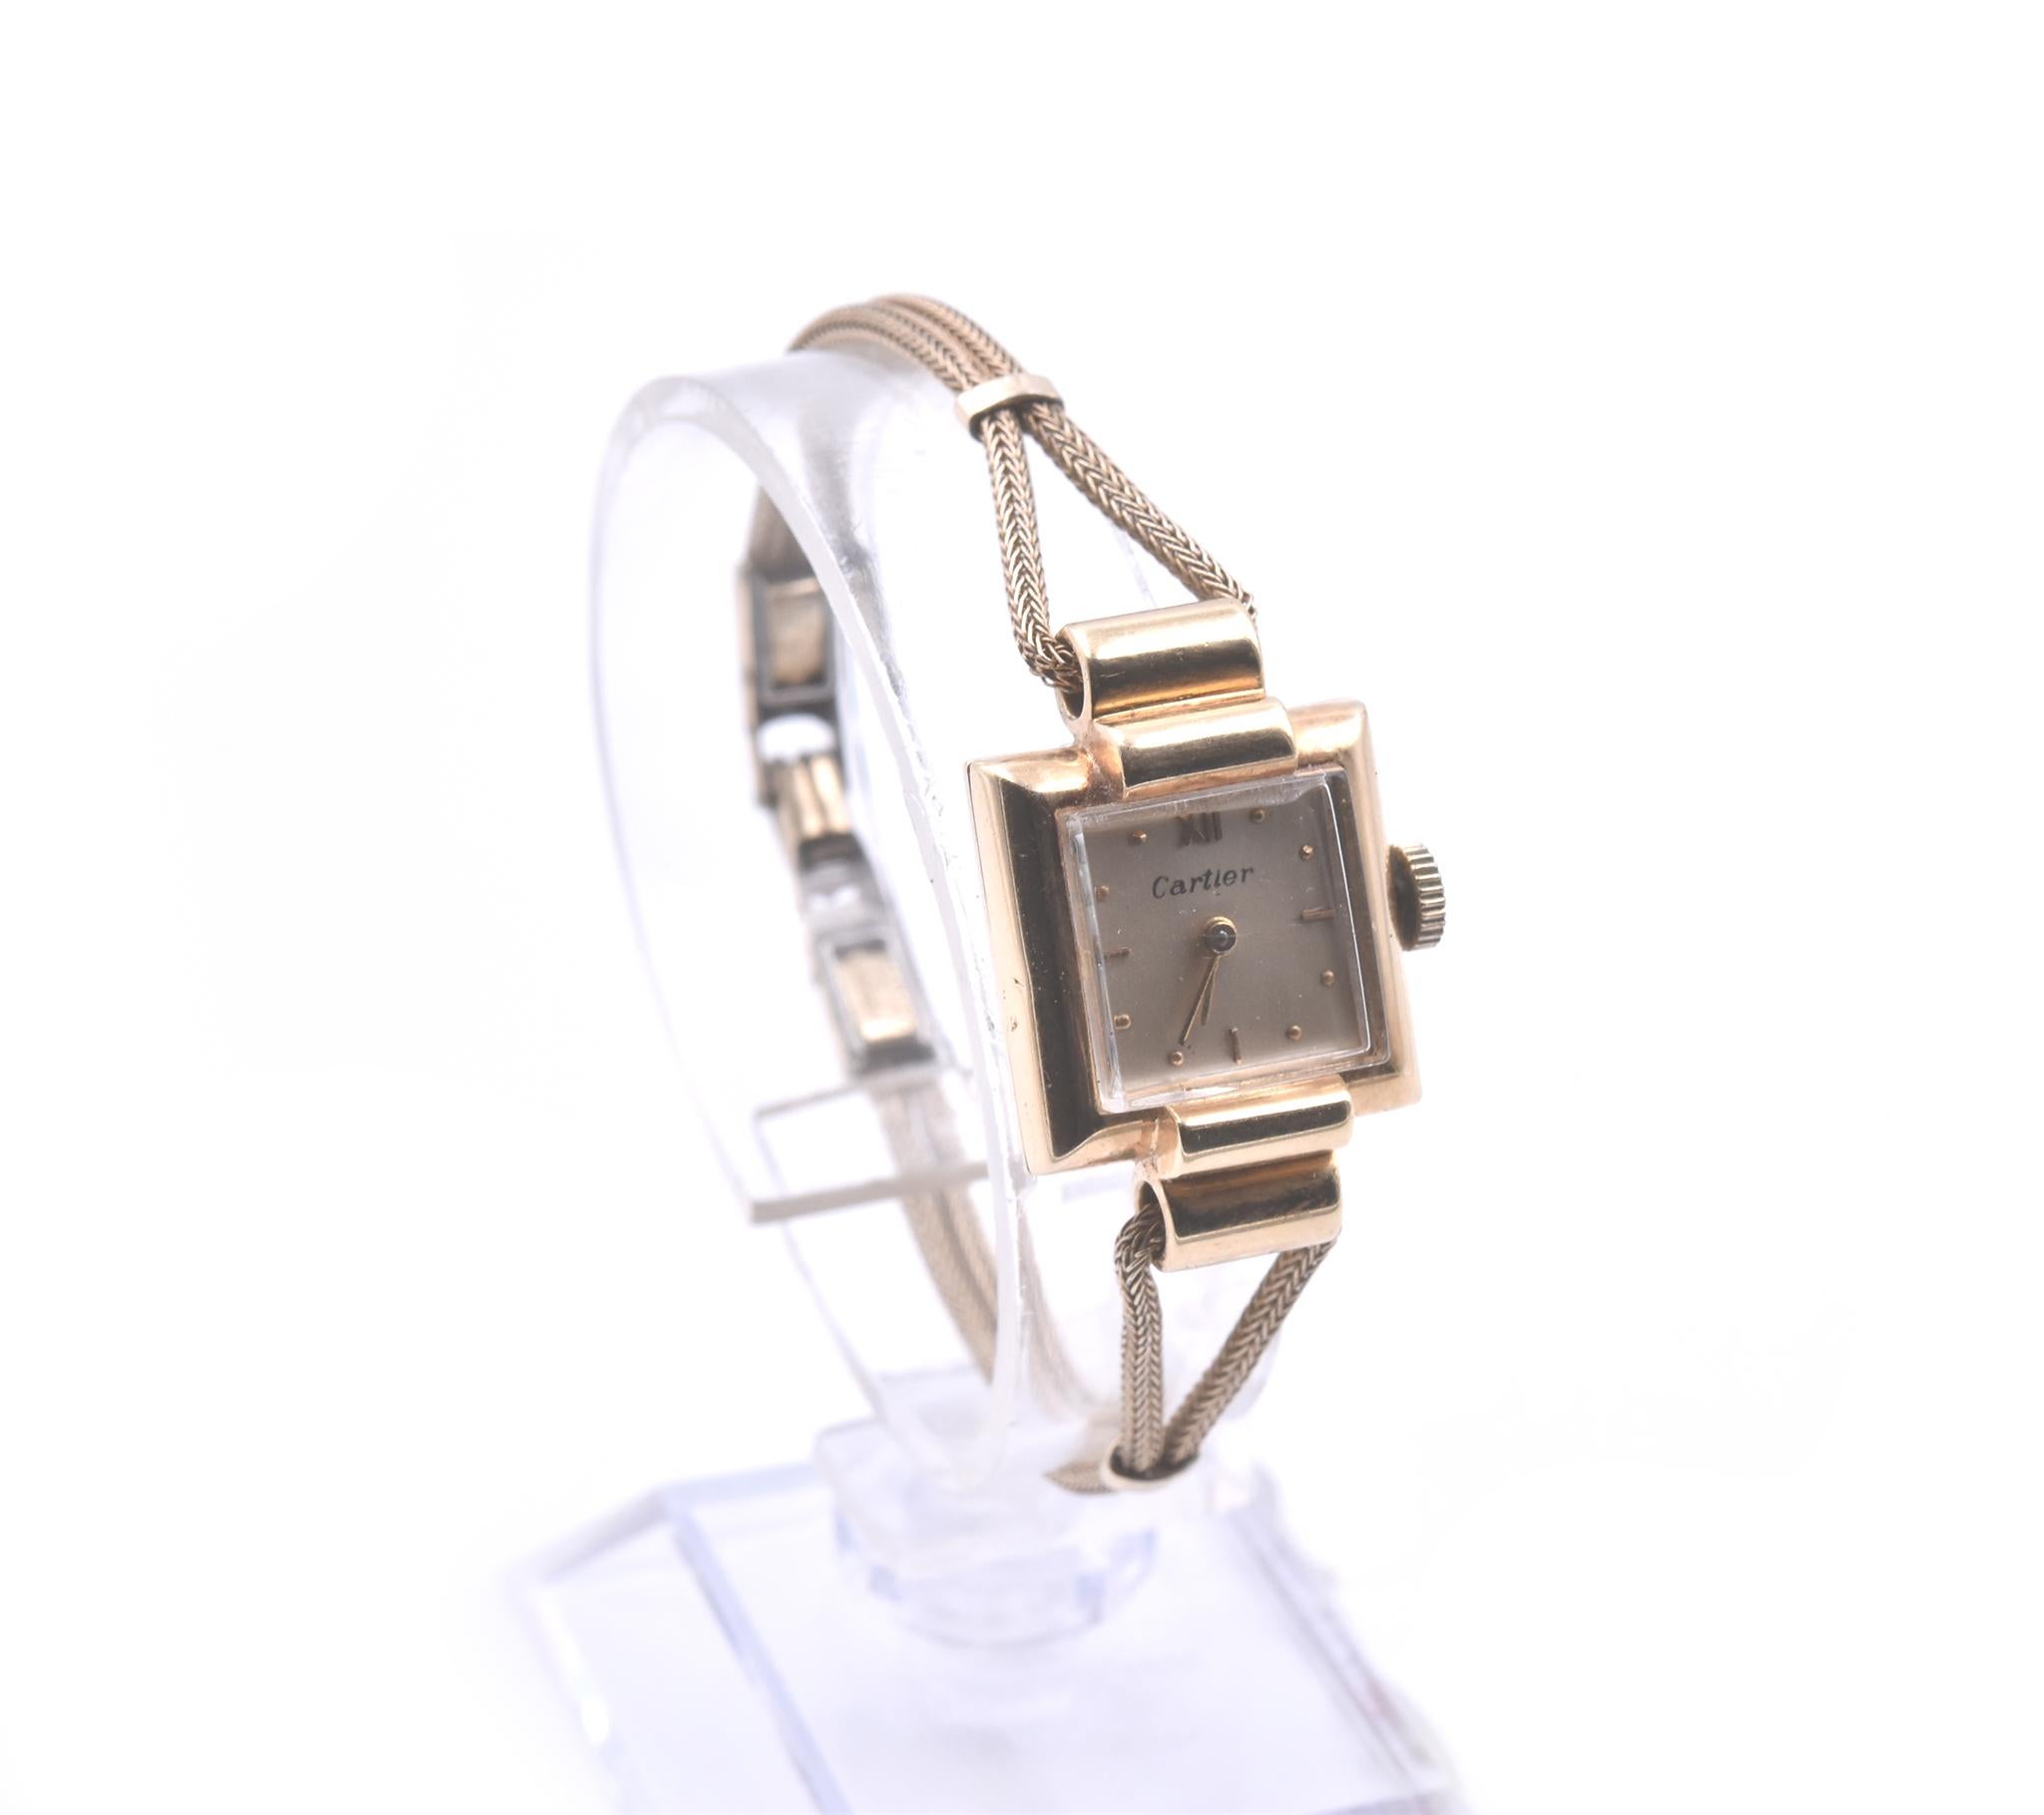 Movement: mechanical
Function: hours, minutes
Case: square 17.76mm 18k yellow gold case, plastic protective crystal, pull/push crown 
Dial: gold dial, gold tone hands, gold tone hour markers
Band: double wheat chain bracelet with jewelry fold over